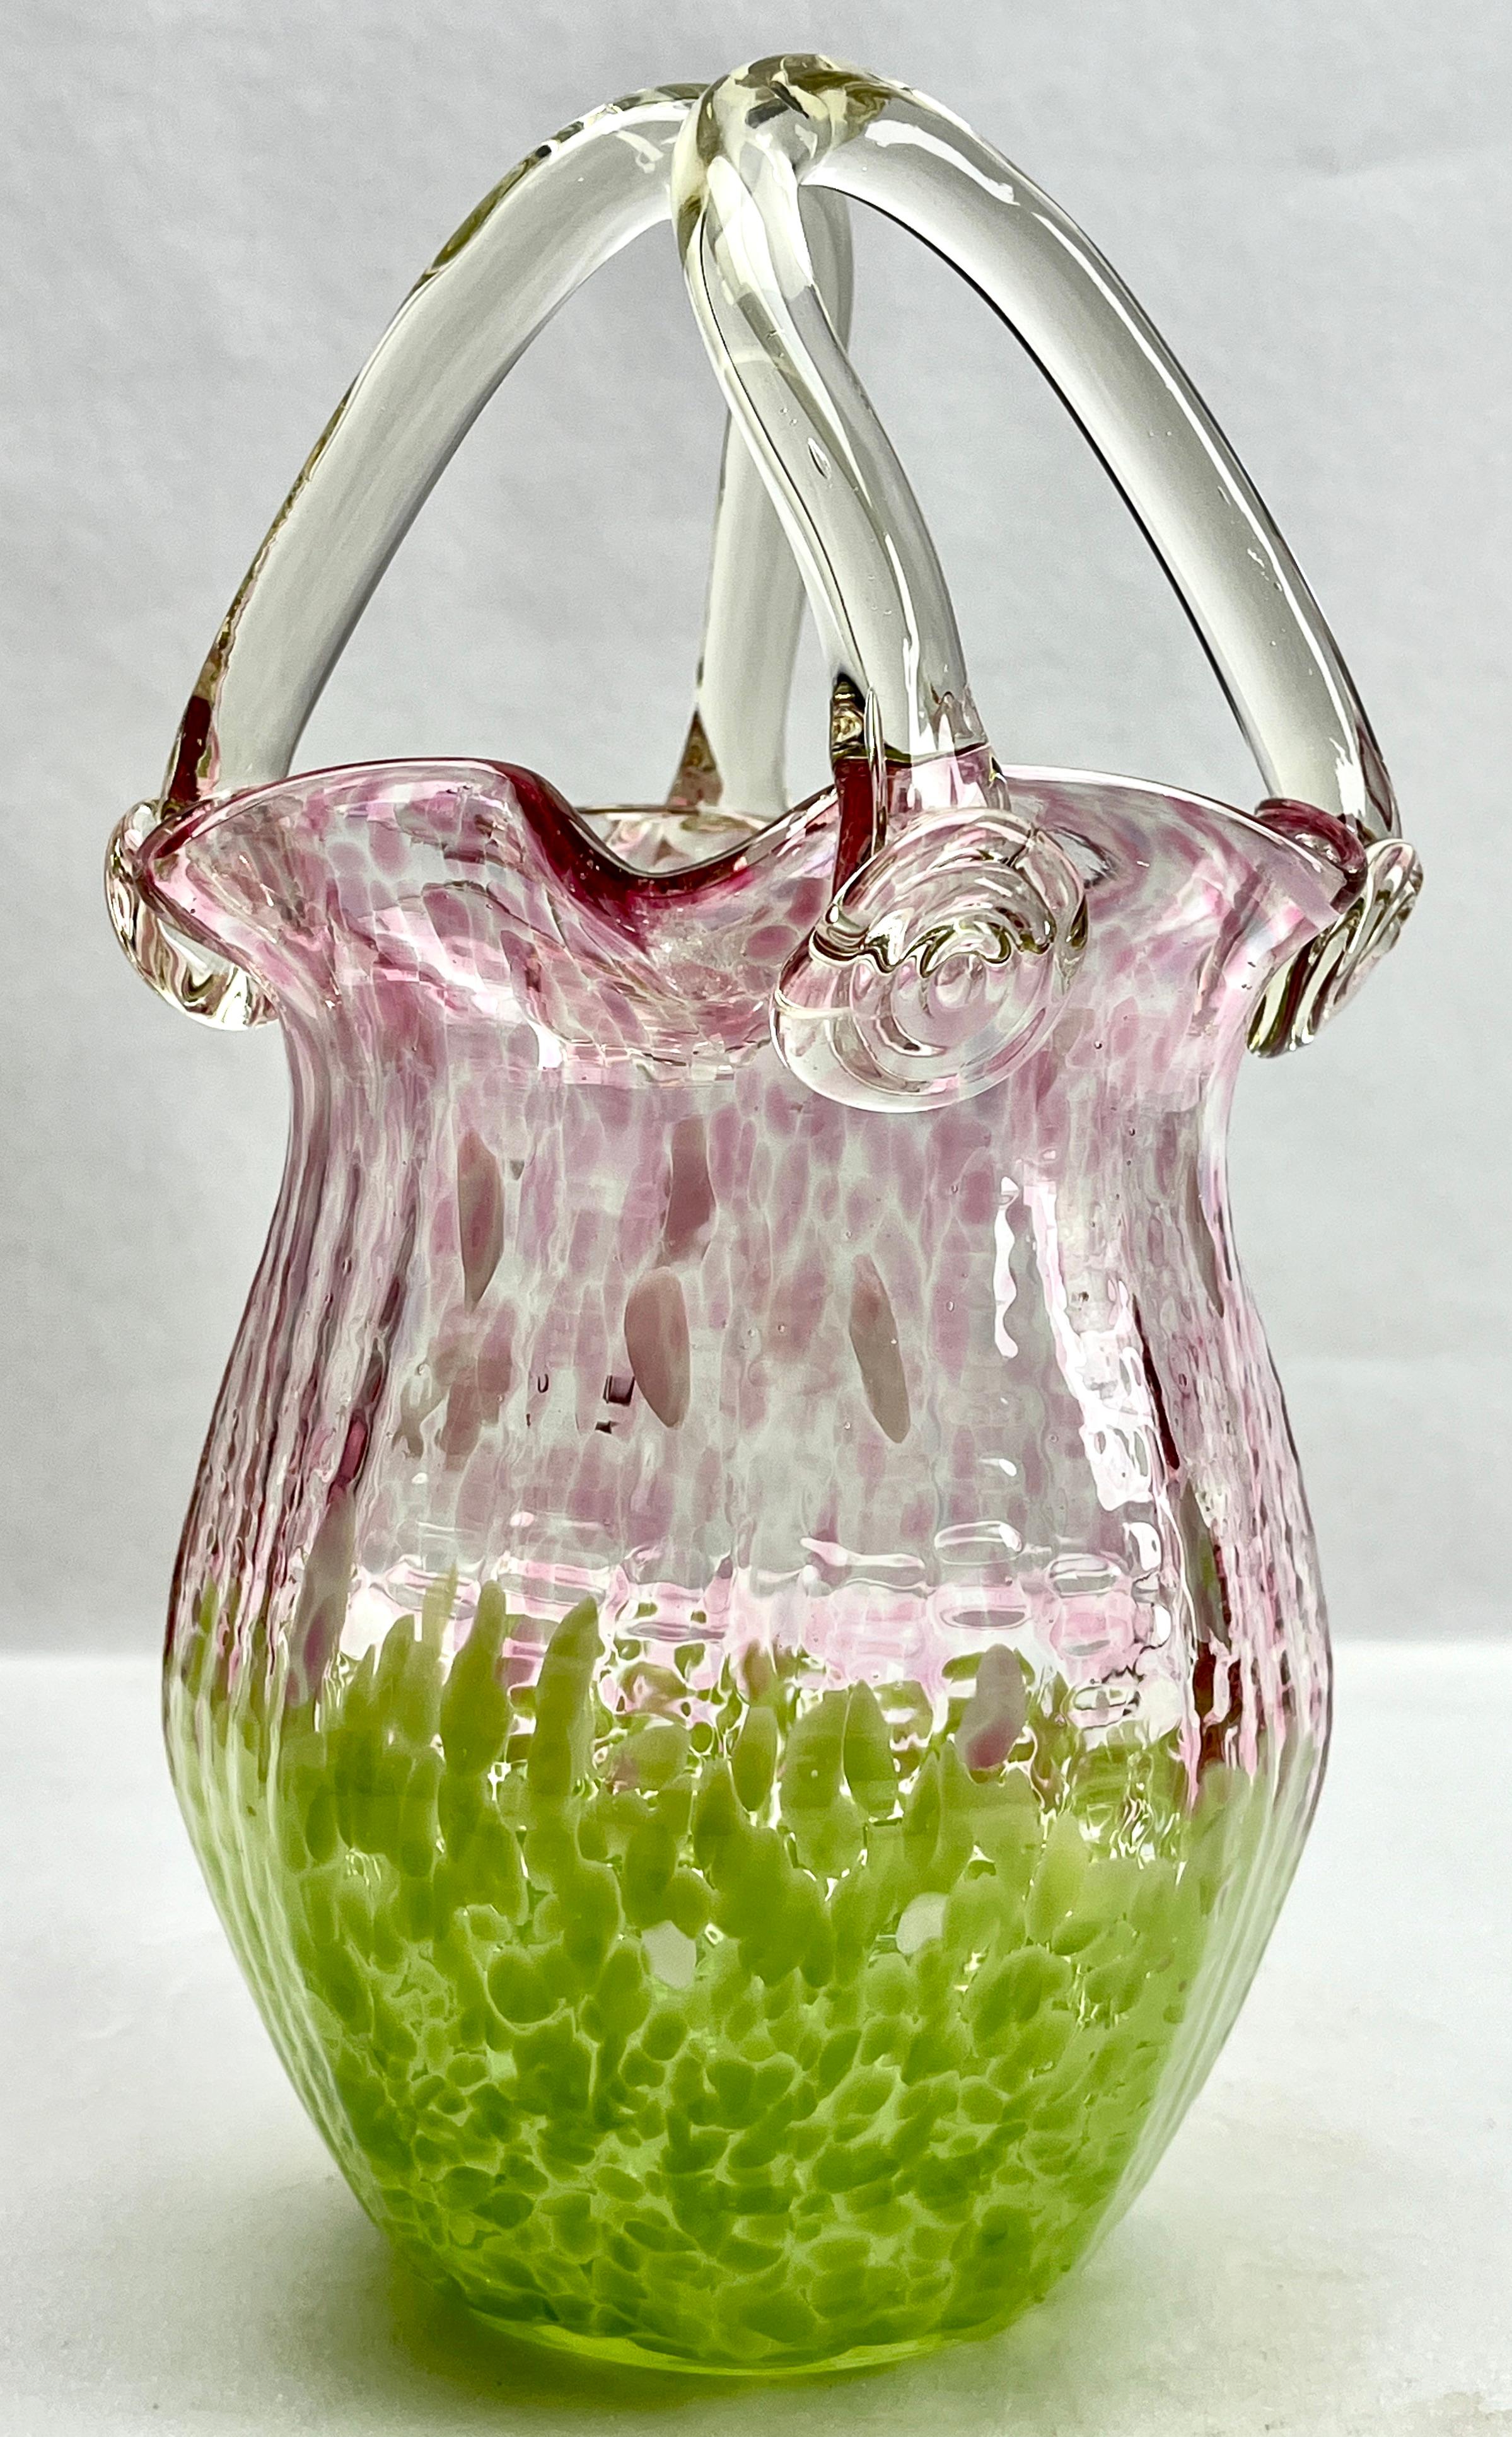 Loetz Art Nouveau Basket Whit Details of Irradiated Glass, 1930s For Sale 1